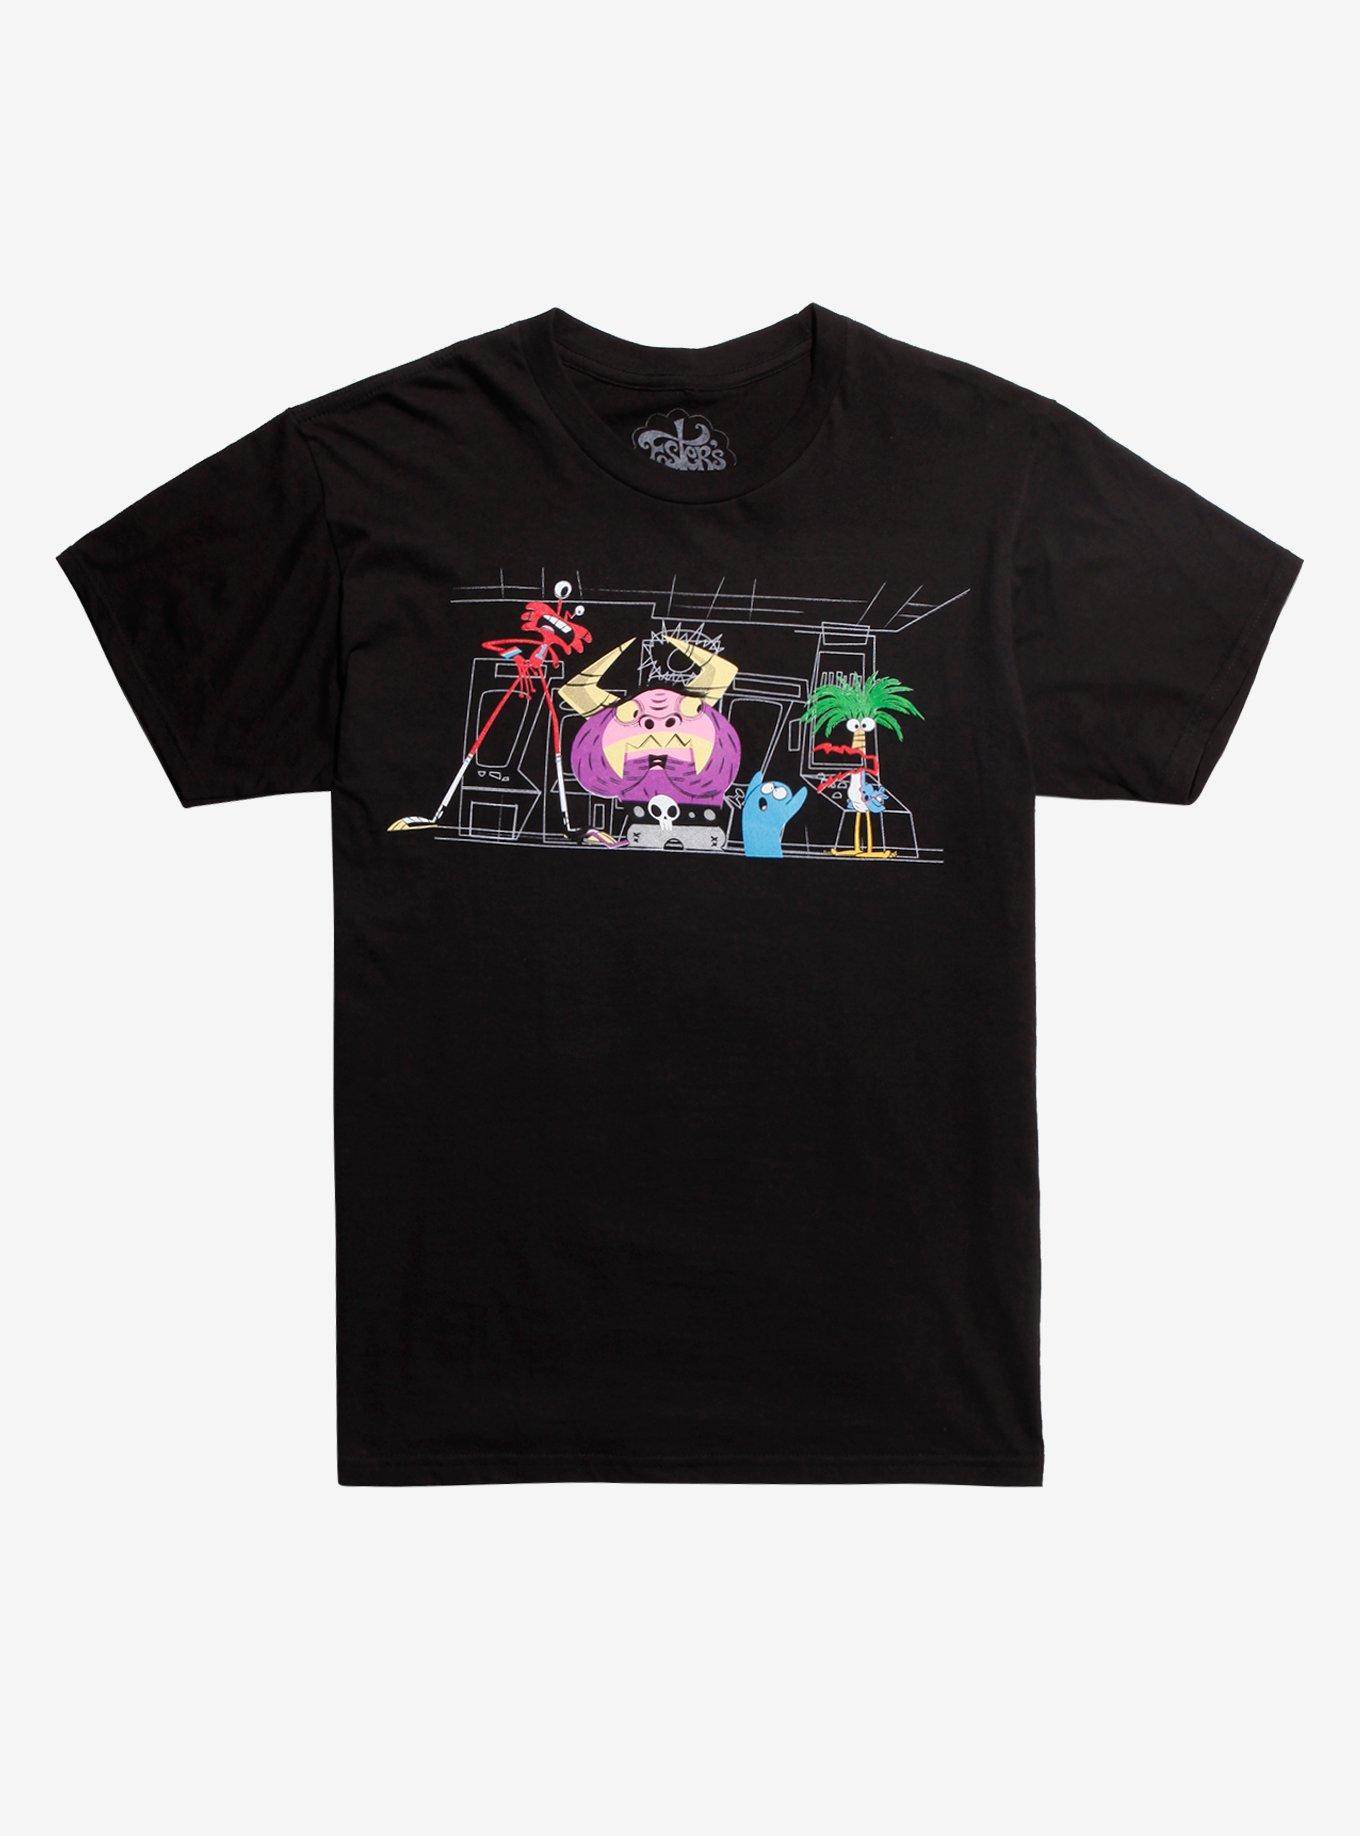 Foster's Home For Imaginary Friends Schlock Star Band T-Shirt | Hot Topic